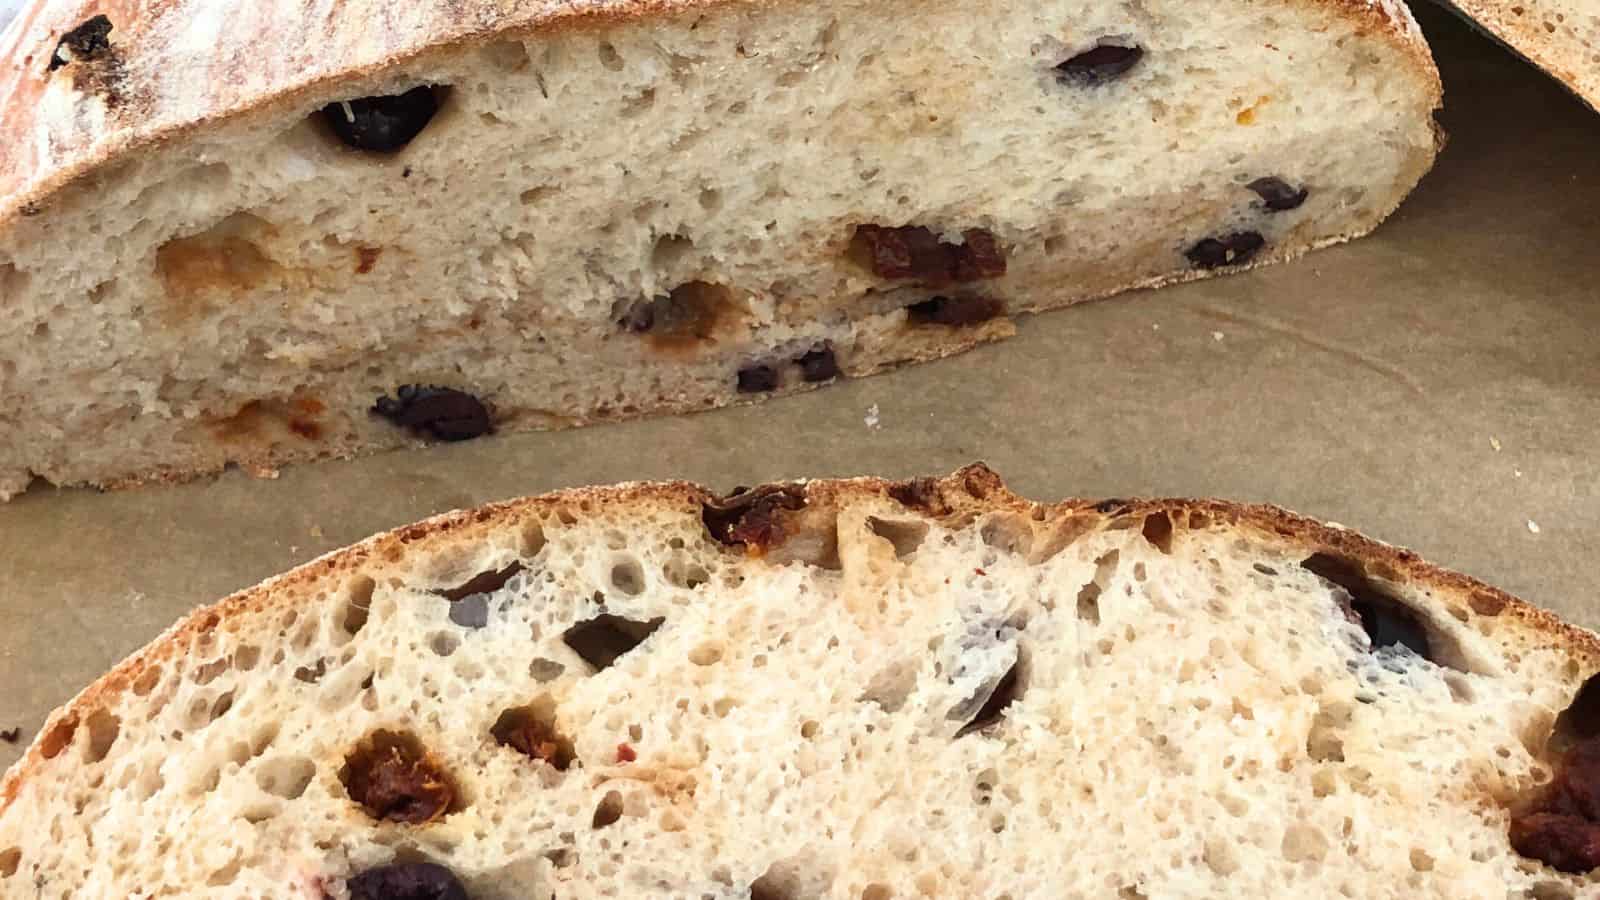 Close-up of sliced olive bread on a cutting board, showing the interior texture and olives embedded in the loaf.